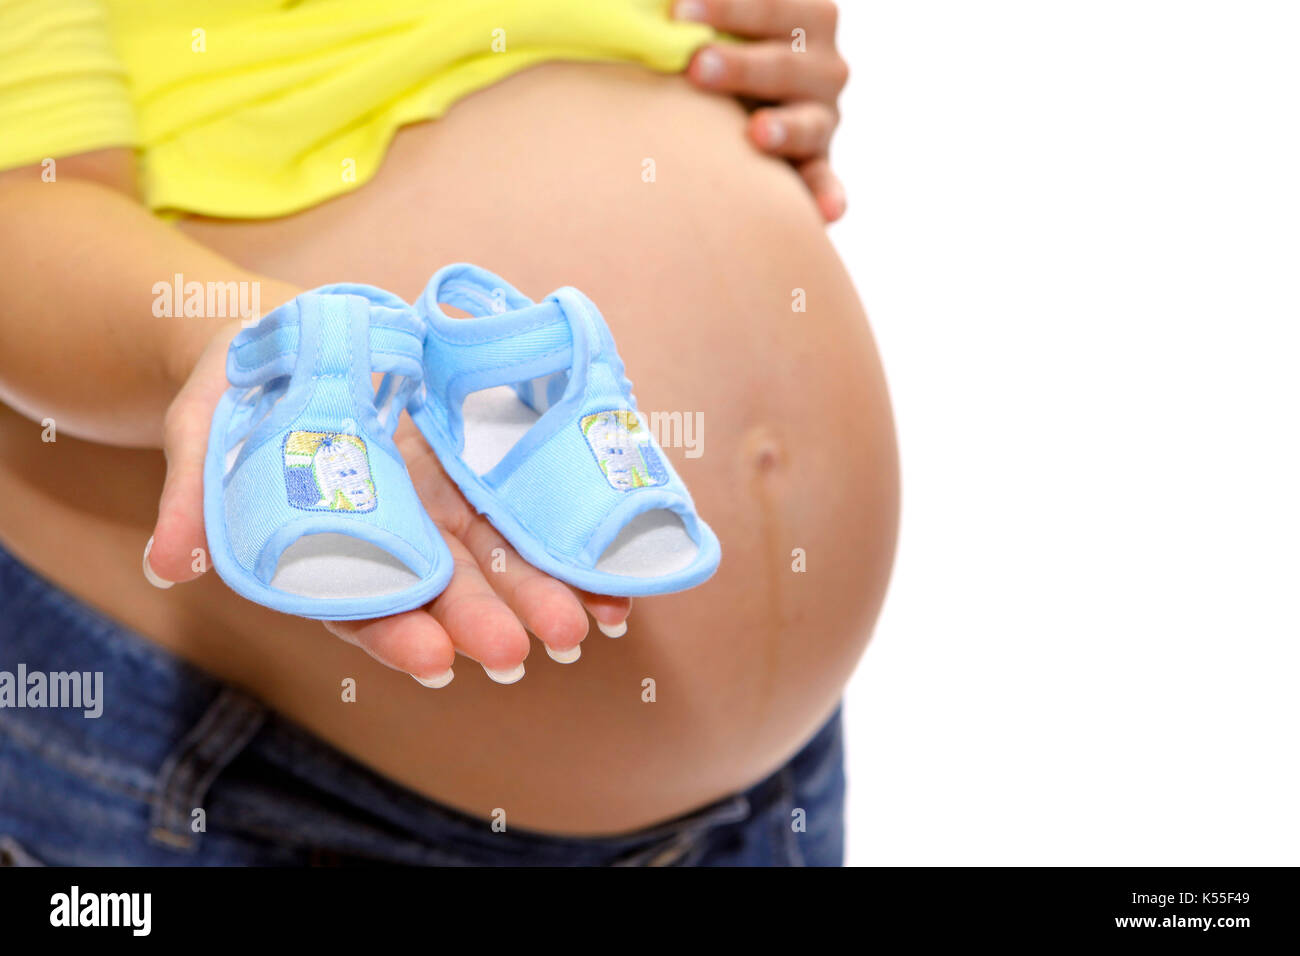 Pregnant woman with baby bump shows baby shoes Stock Photo